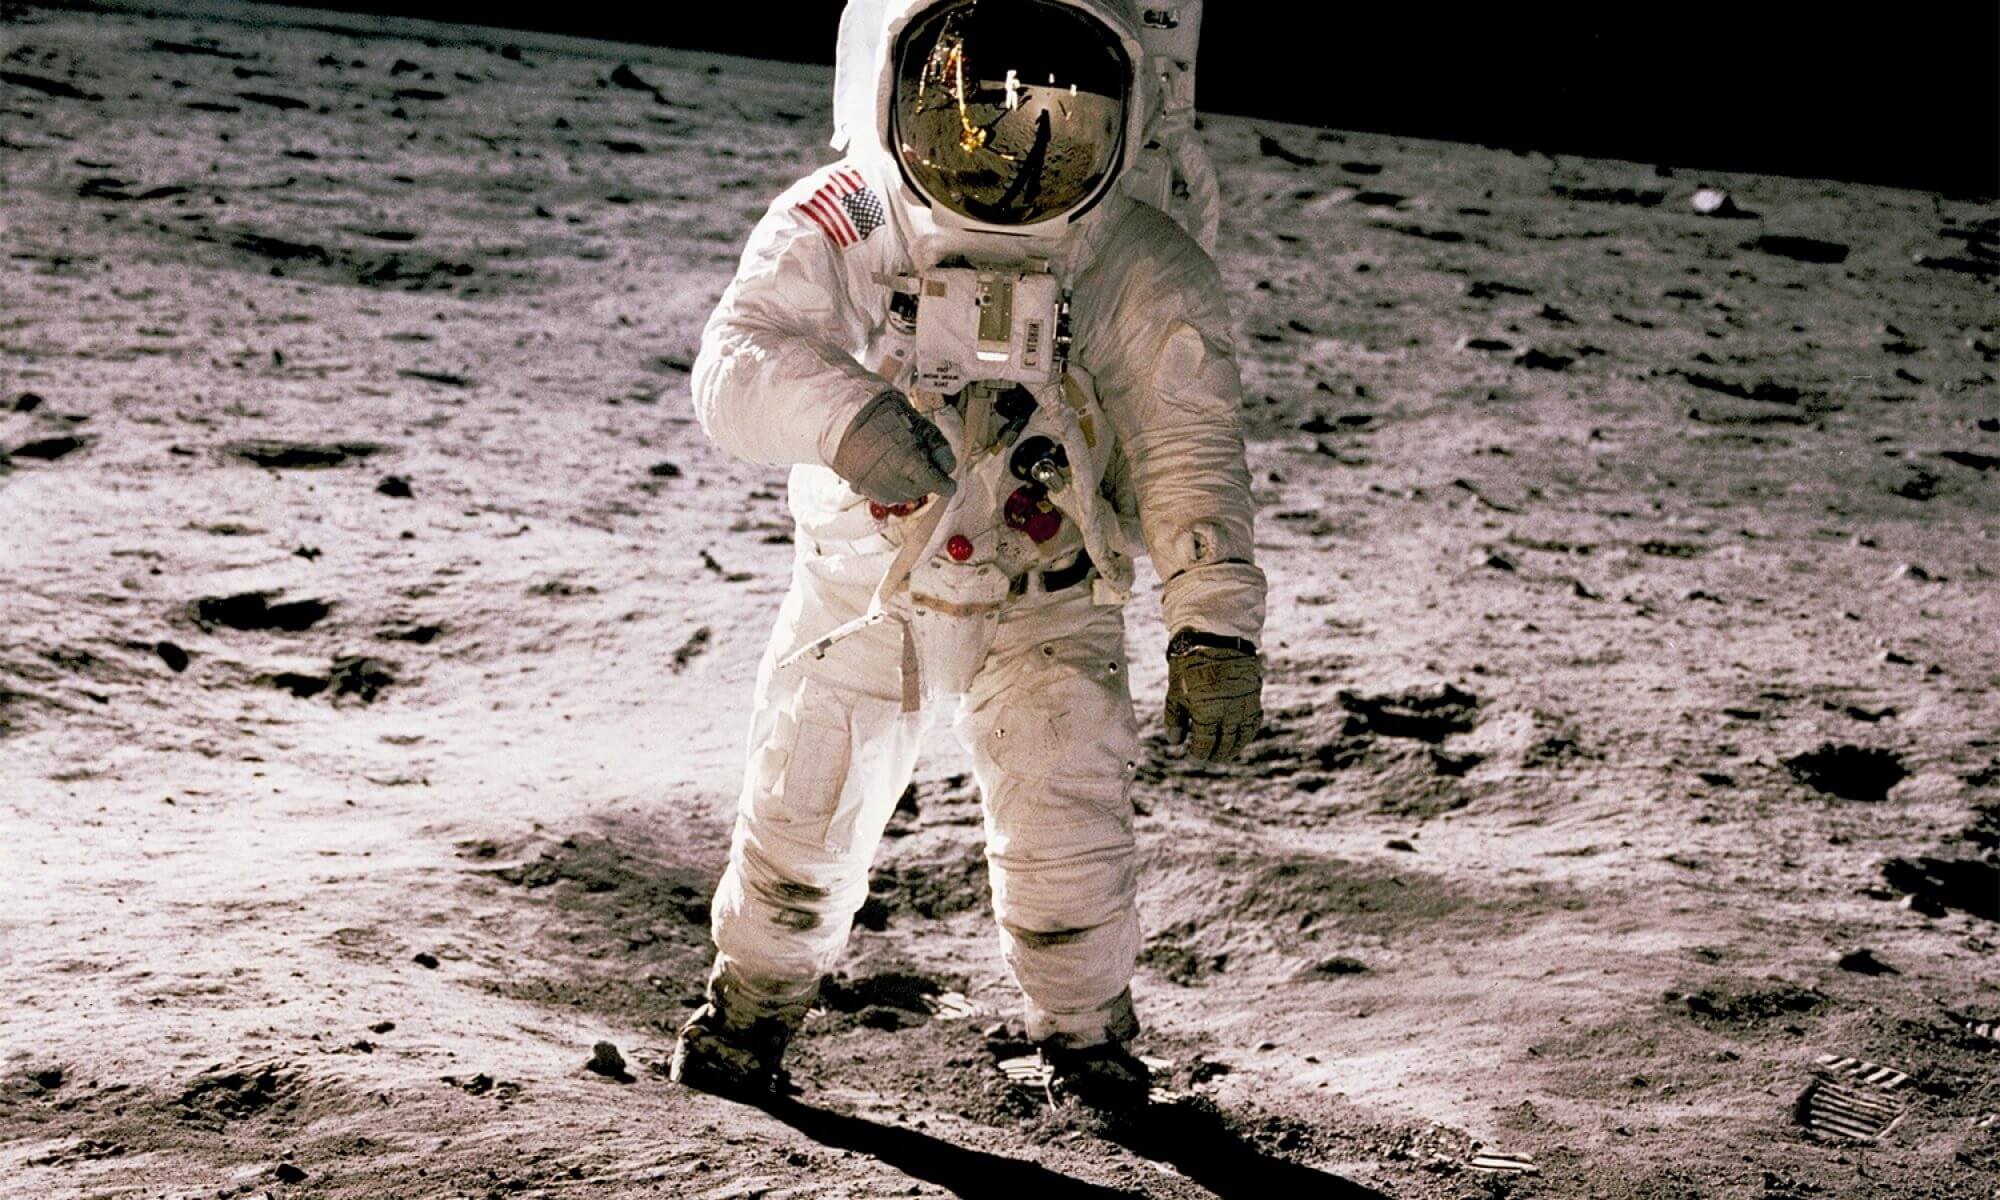 Neil Armstrong Man on the Moon Essay